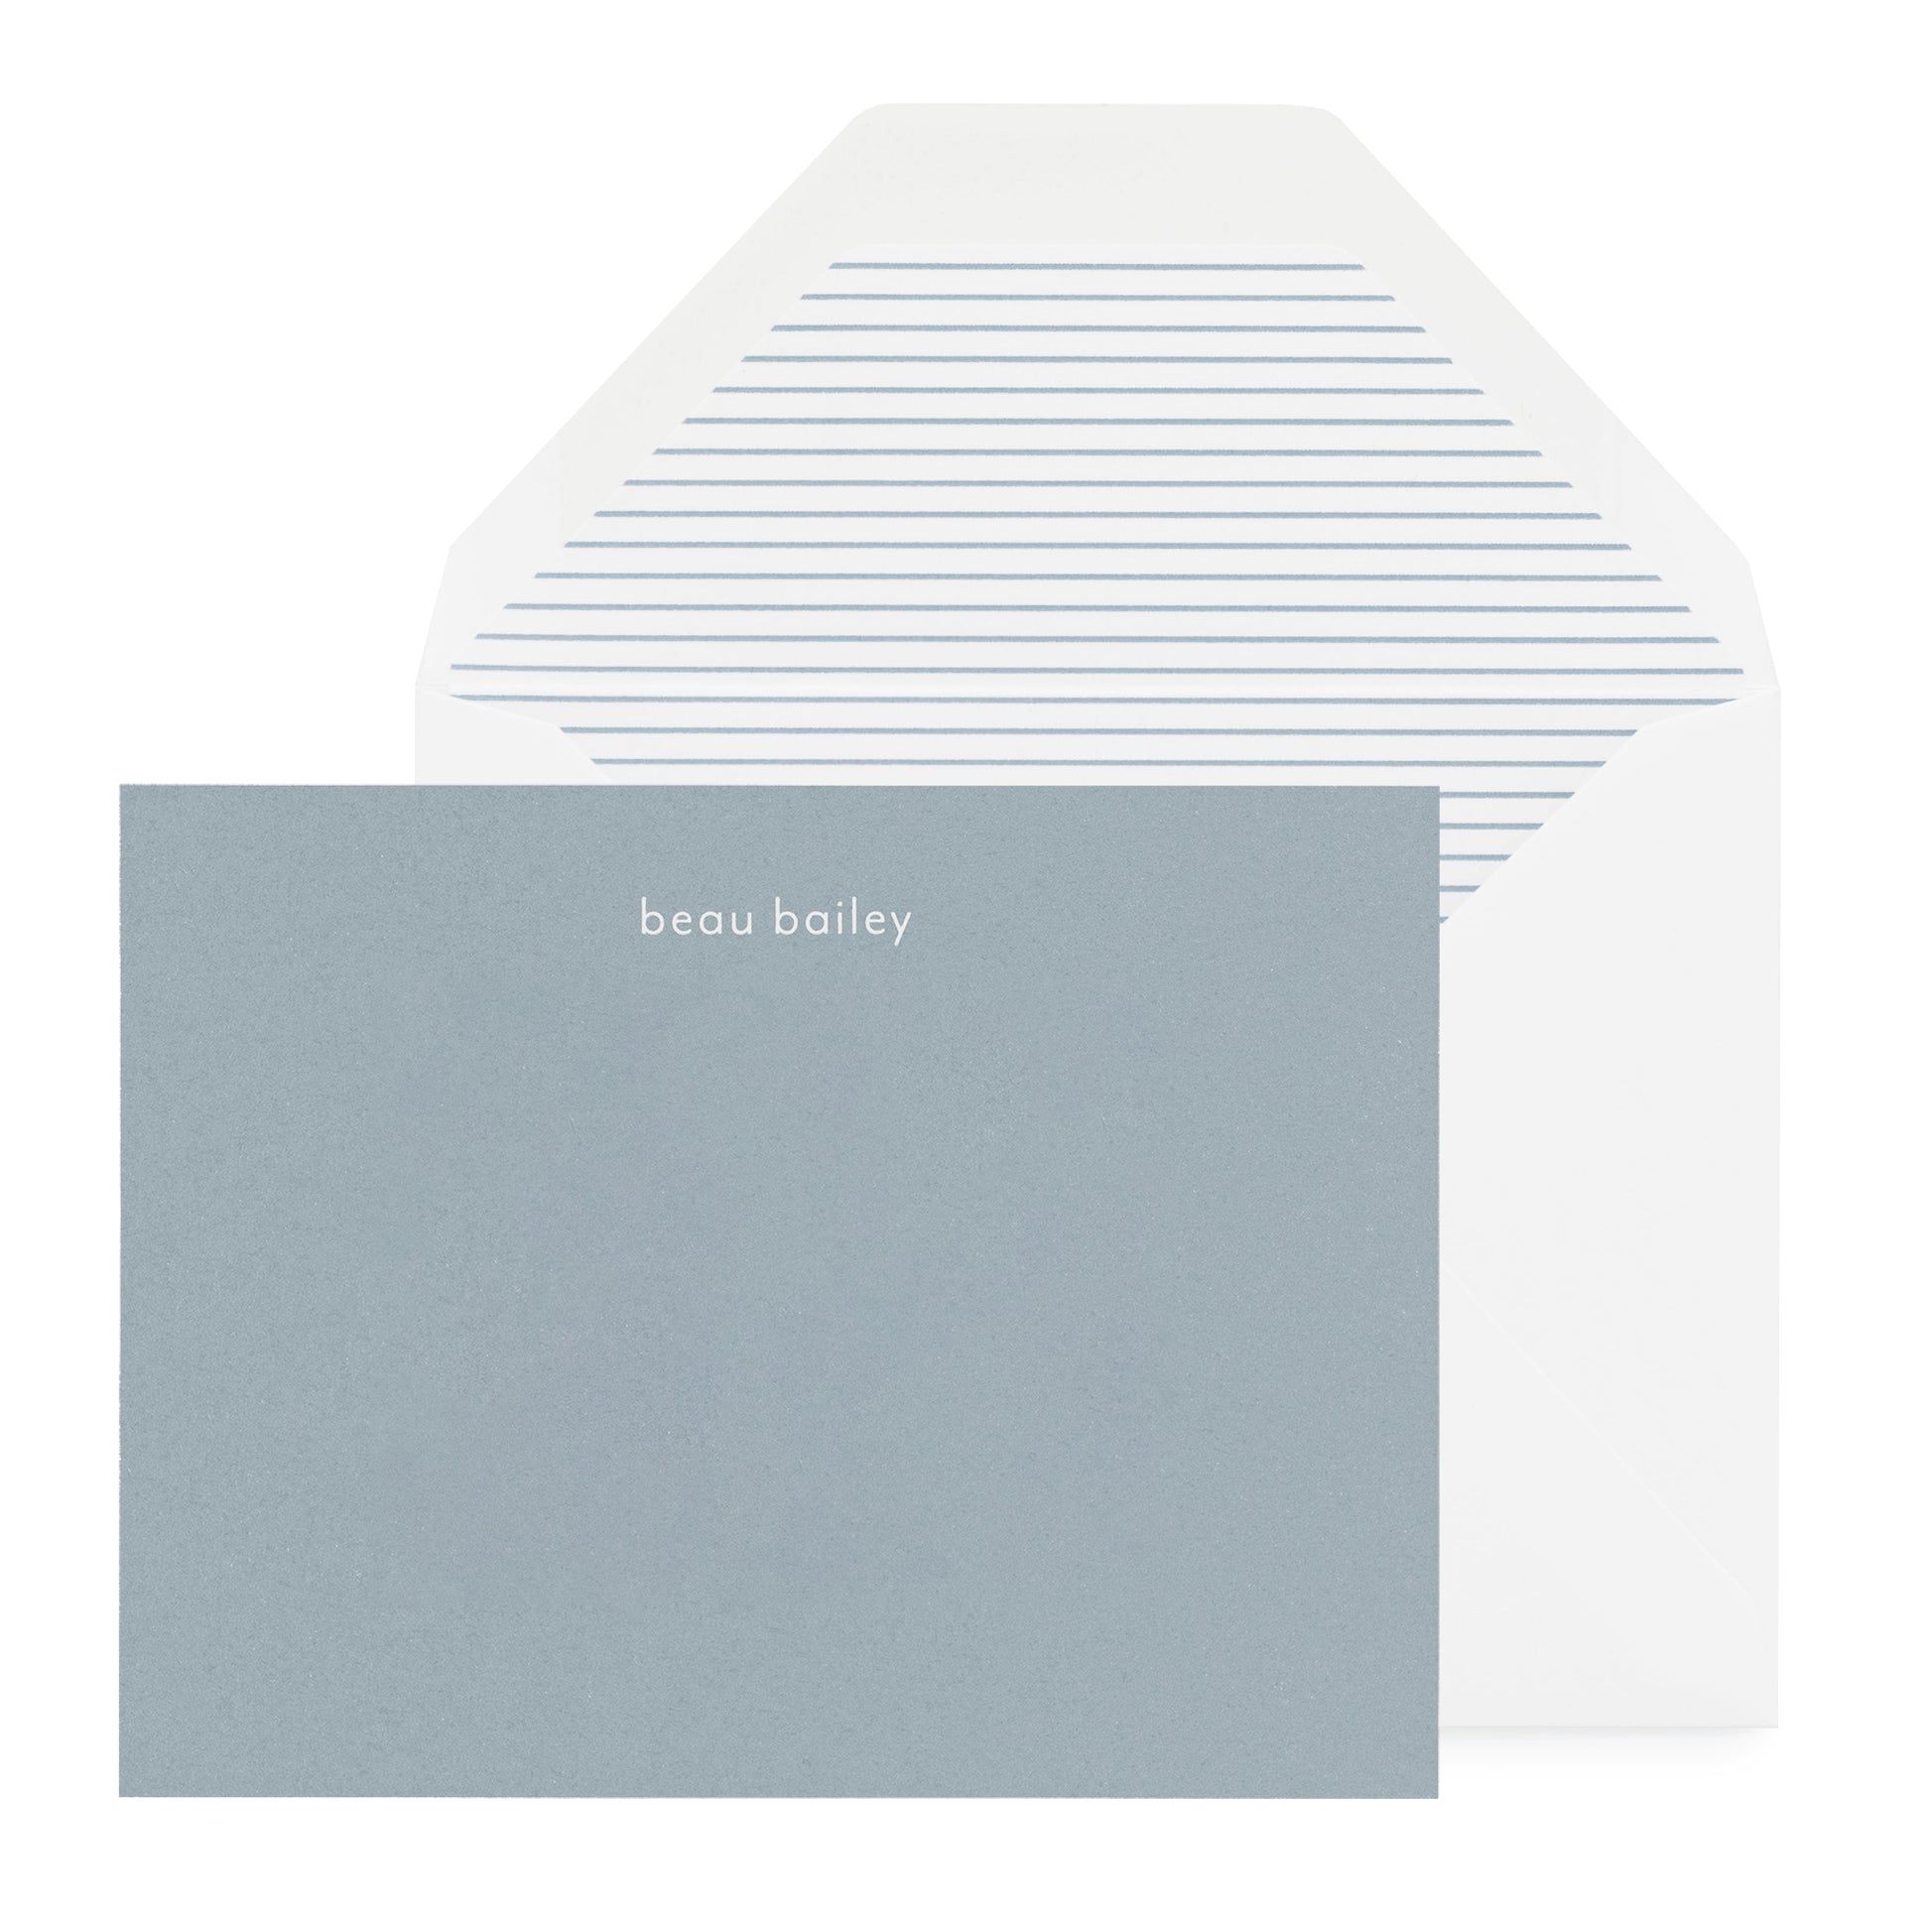 Slate blue stationery with white foil name and blue and white striped envelope liner